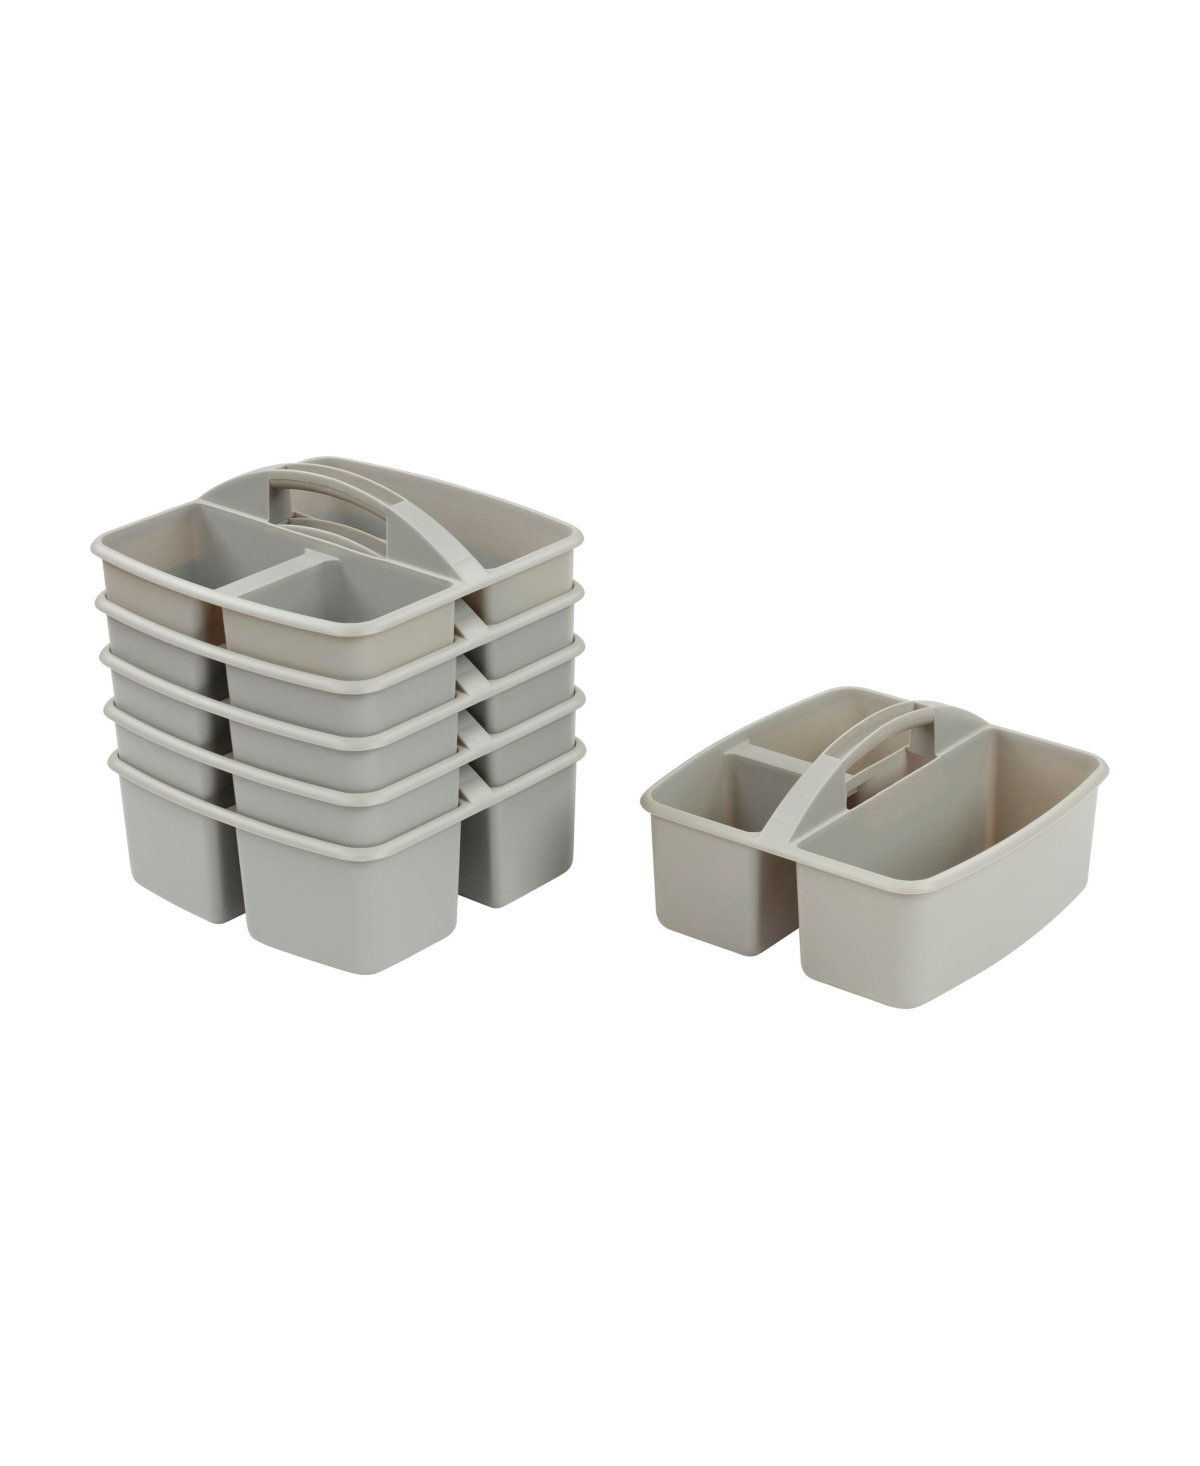 3-Compartment Storage Caddy, Grey, 6-Pack - Grey